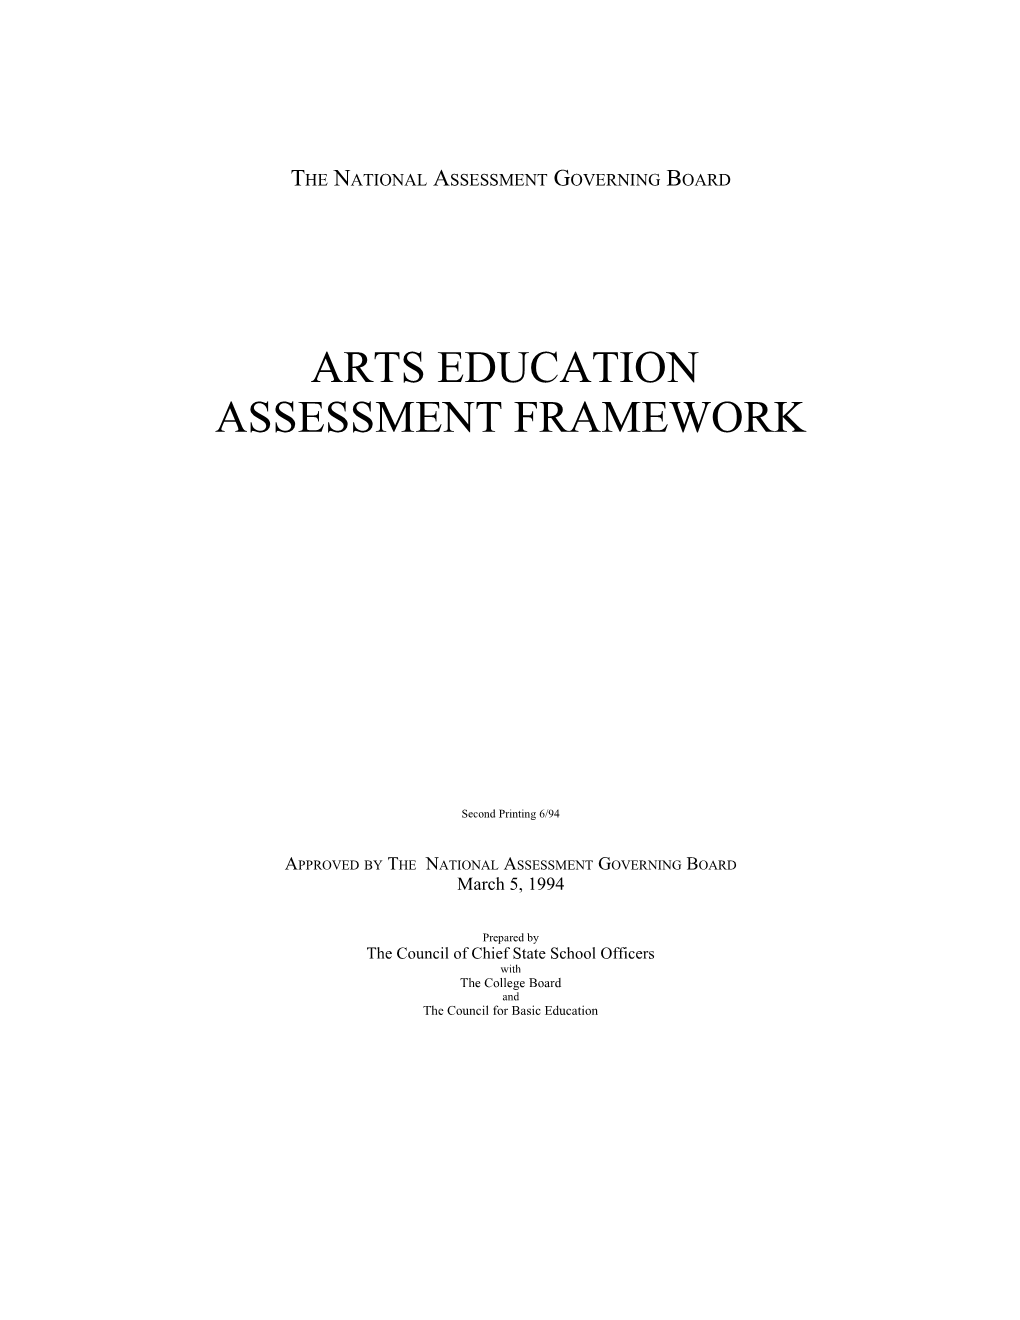 The National Assessment Governing Board